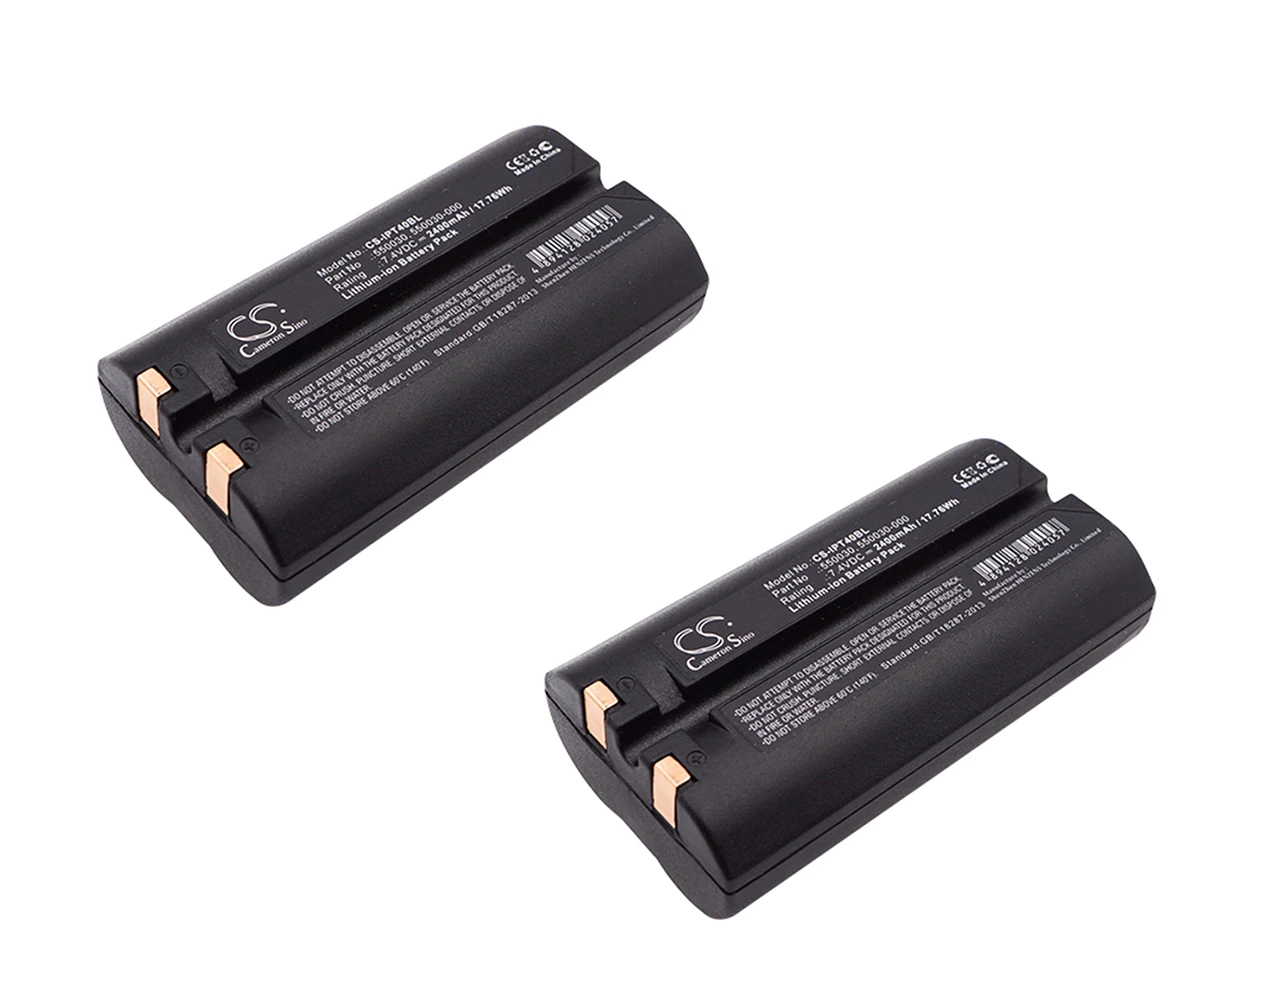 

2pack 2400mA Battery for ONeil Microflash 4T 200360-101,220531-000,550034-000,550039-100,PB20A,PB40,PB41,PW40